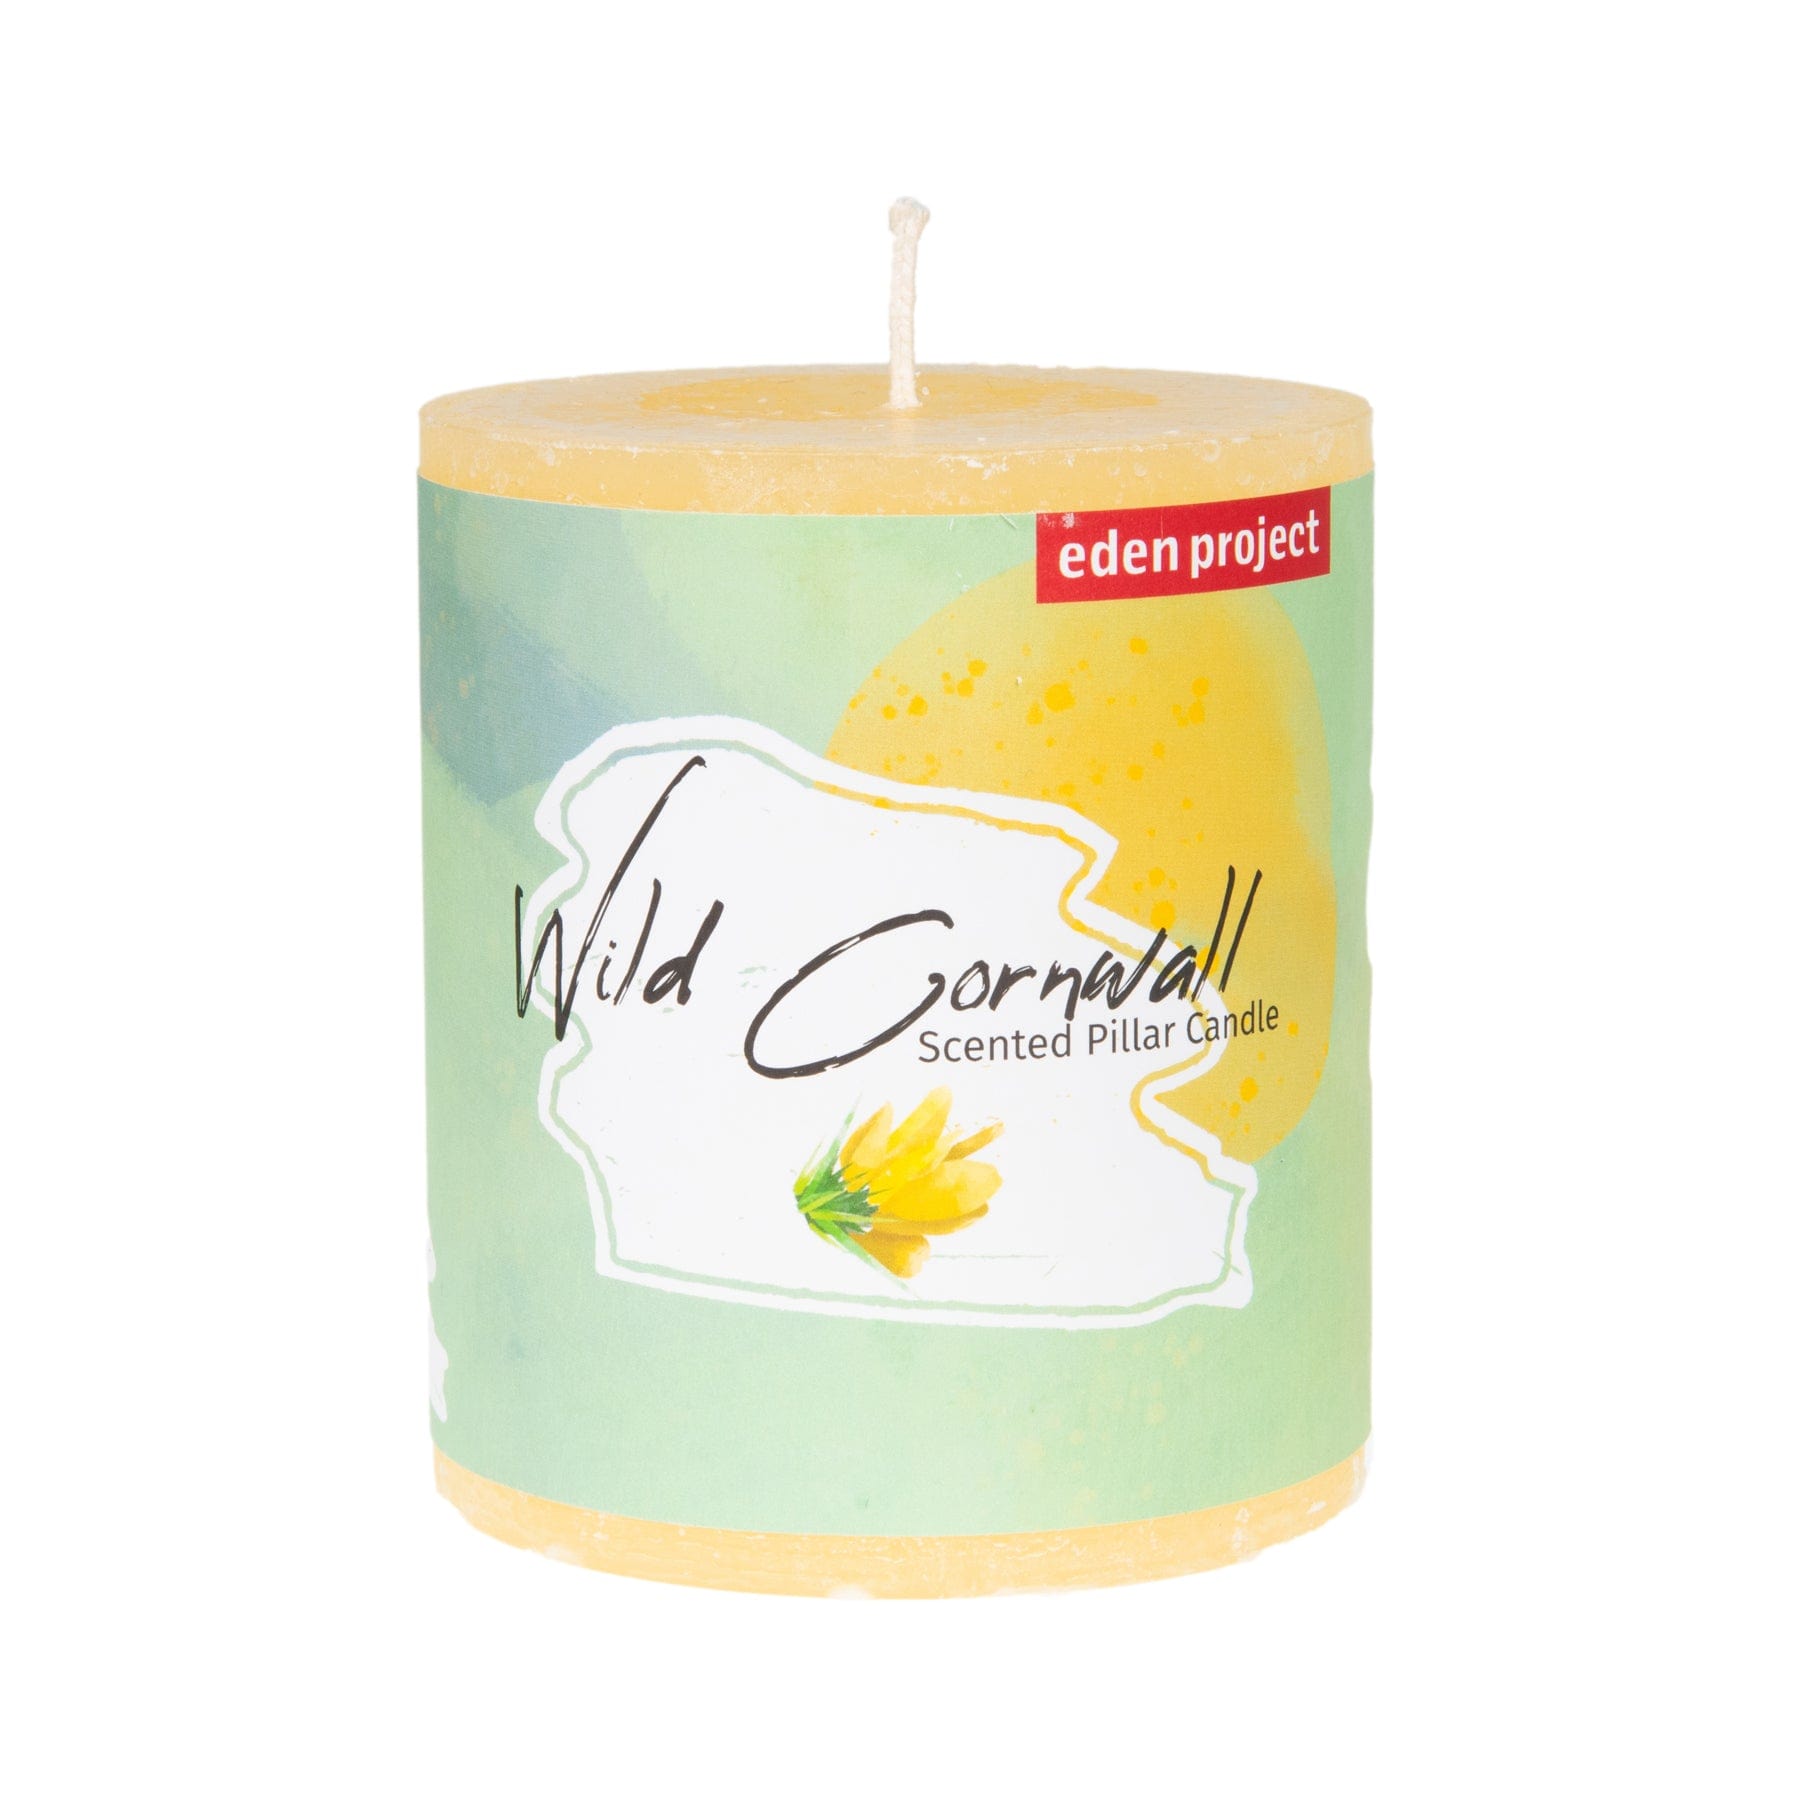 Wild Cornwall scented pillar candle